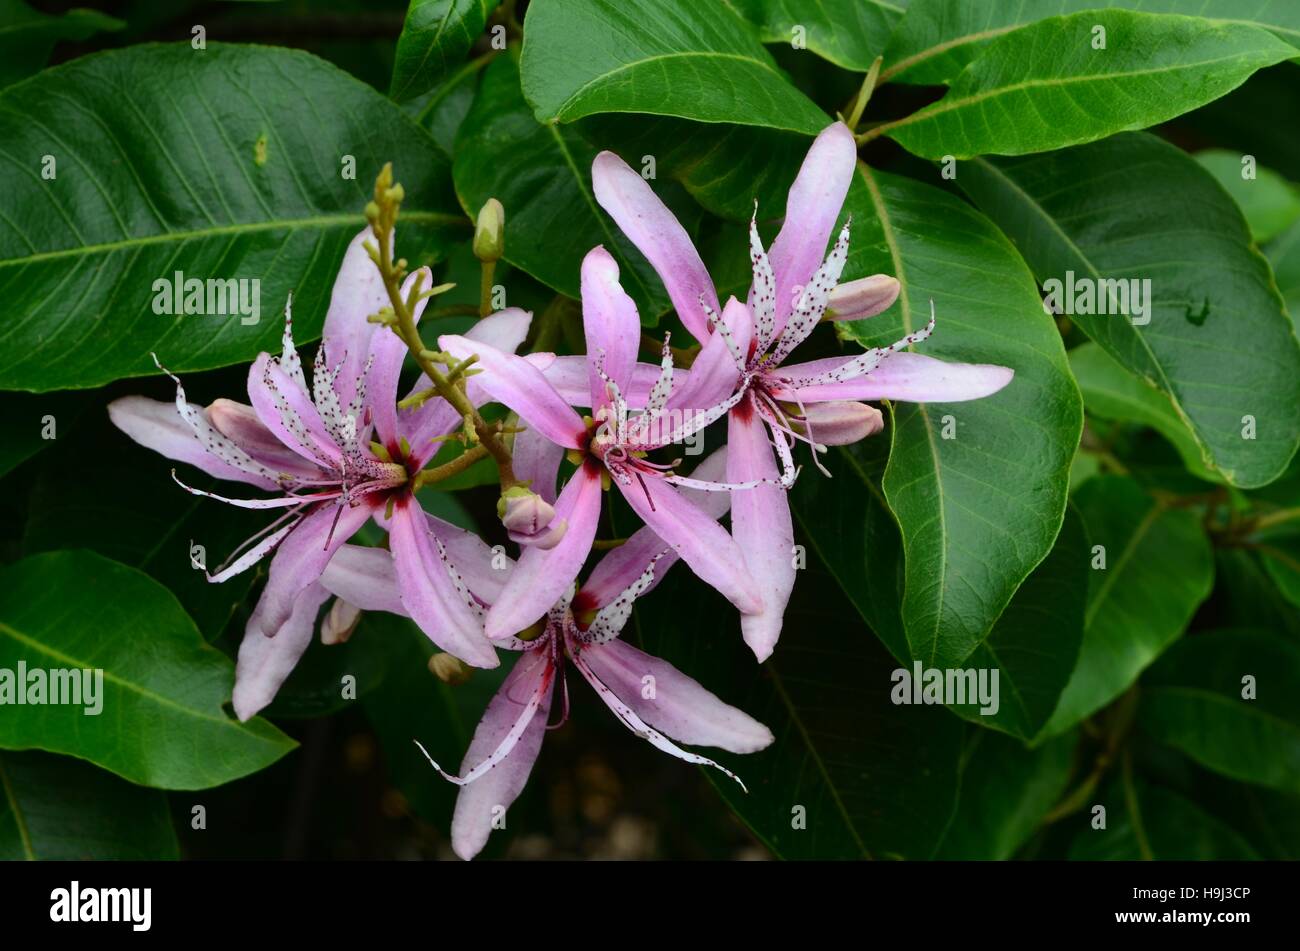 Cape Chestnut - white and mauve flower with purple glands on white petals. Close-up of flower with dark green leaves. Small evergreen hardy tree. Stock Photo